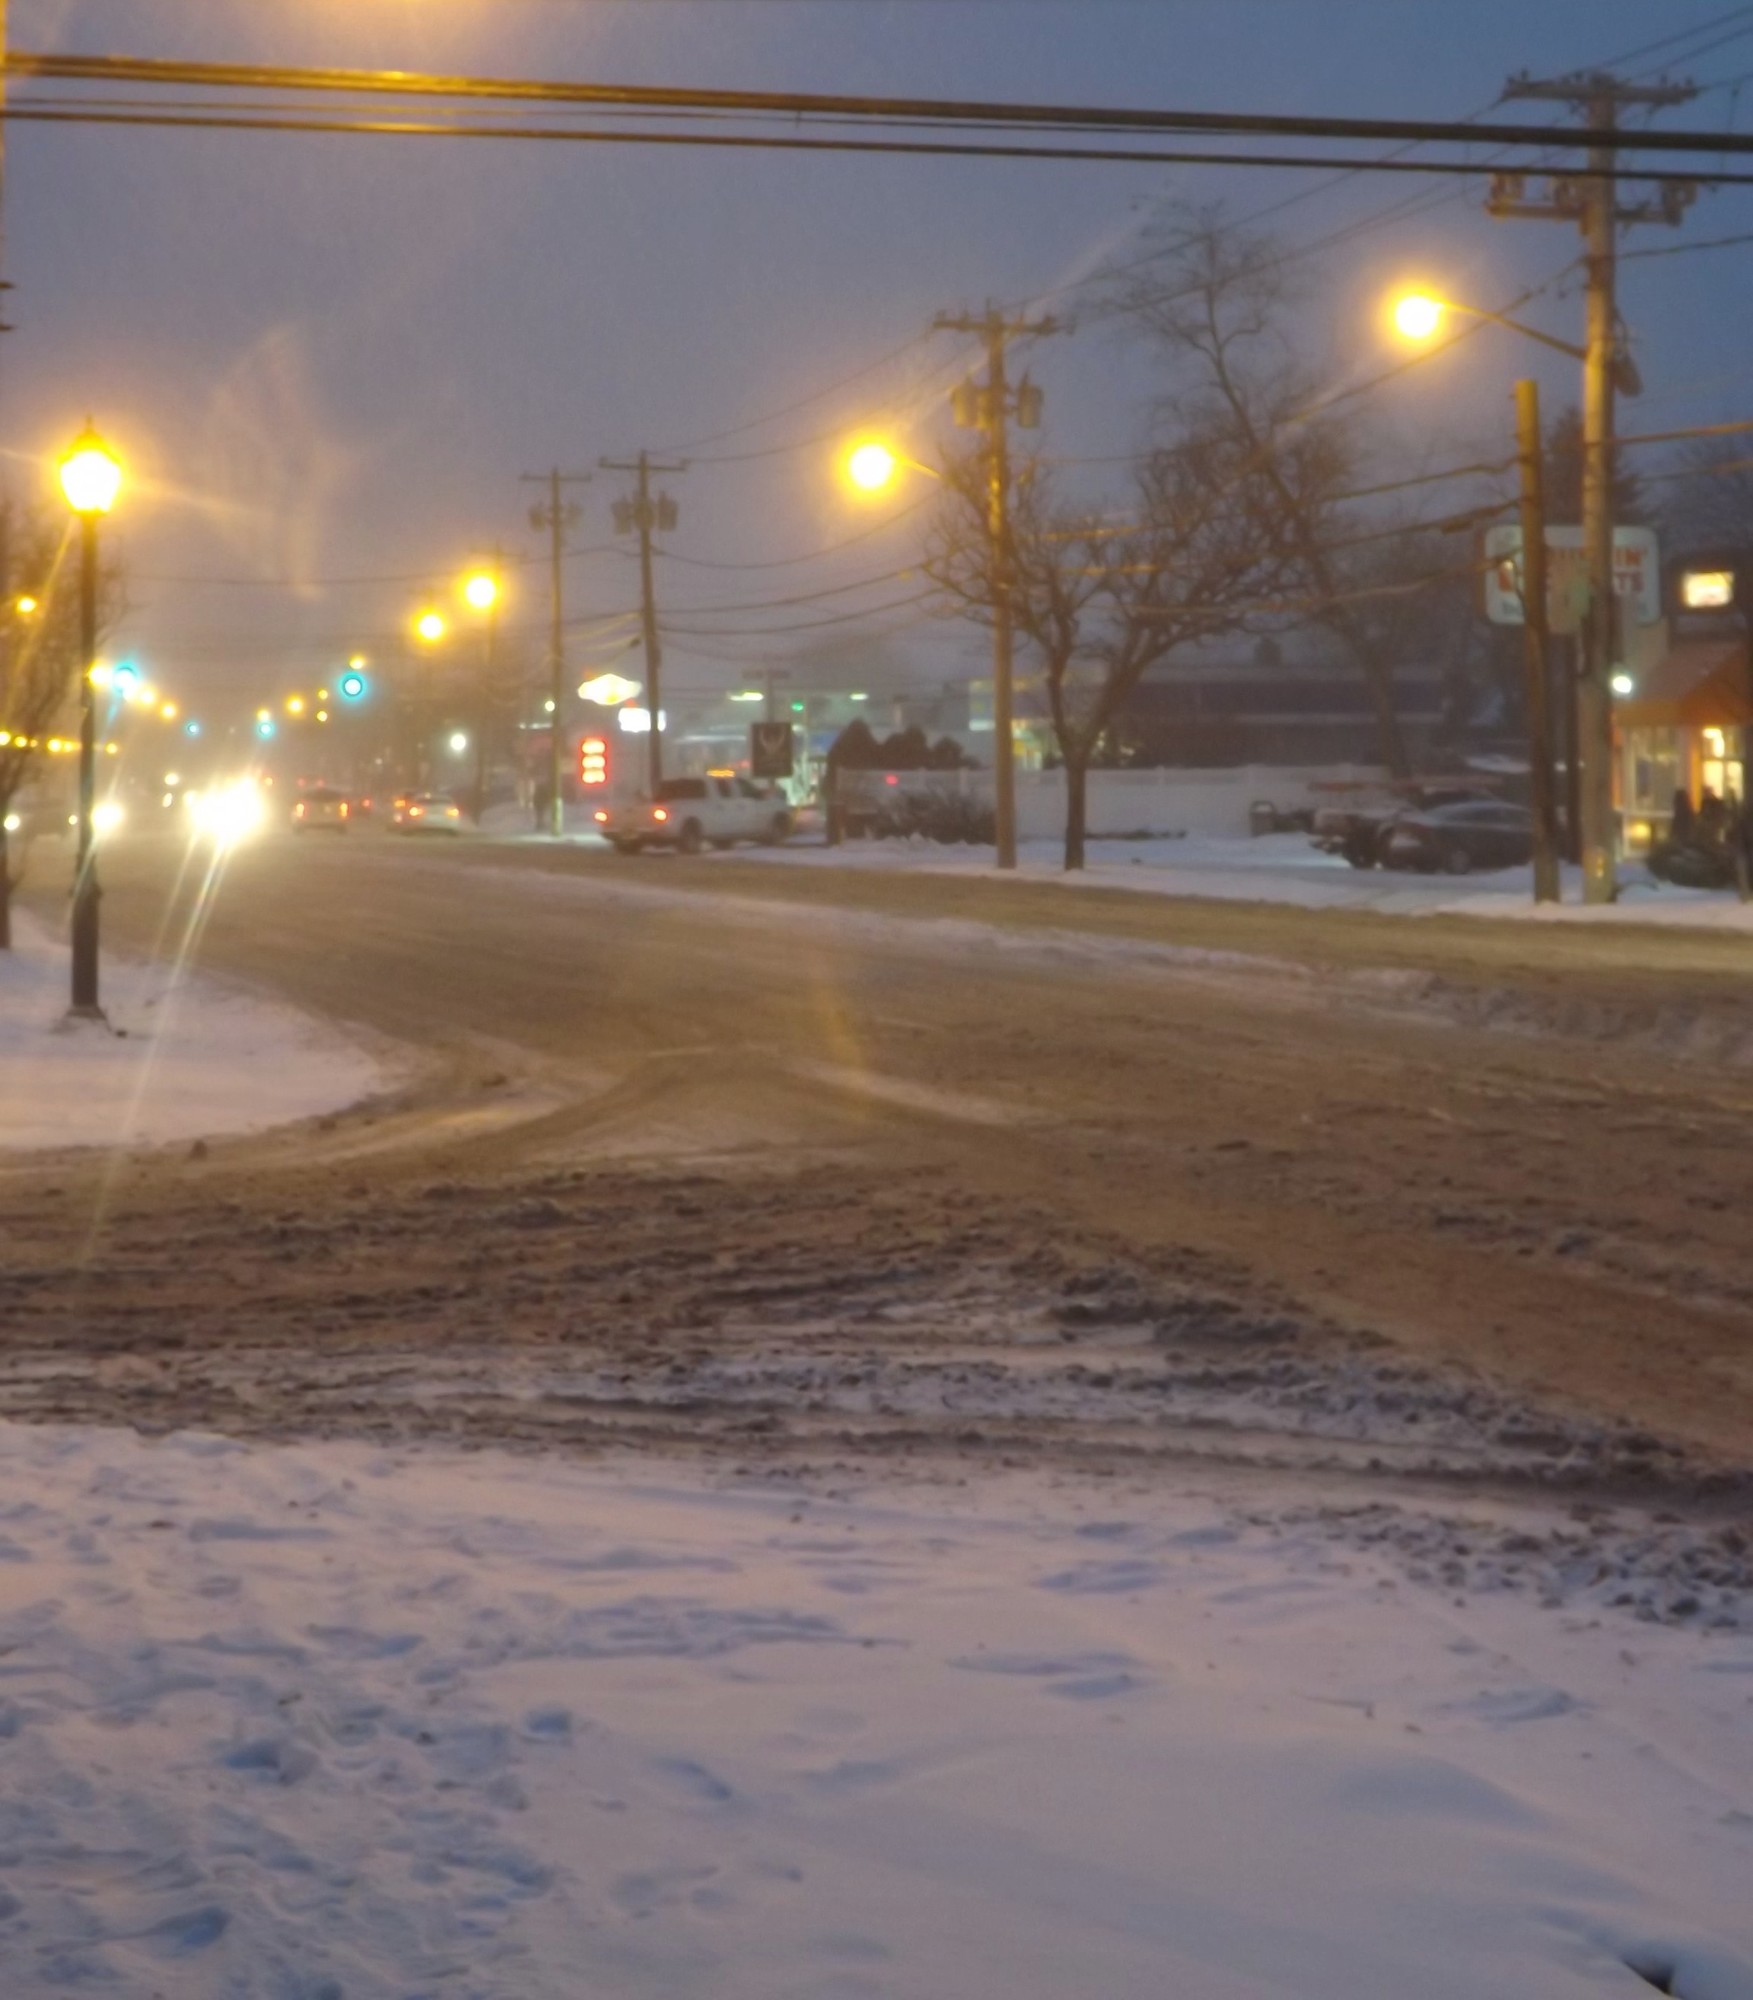 The intersection of Grand Avenue and Stanton Avenue was treacherous for drivers Monday night.